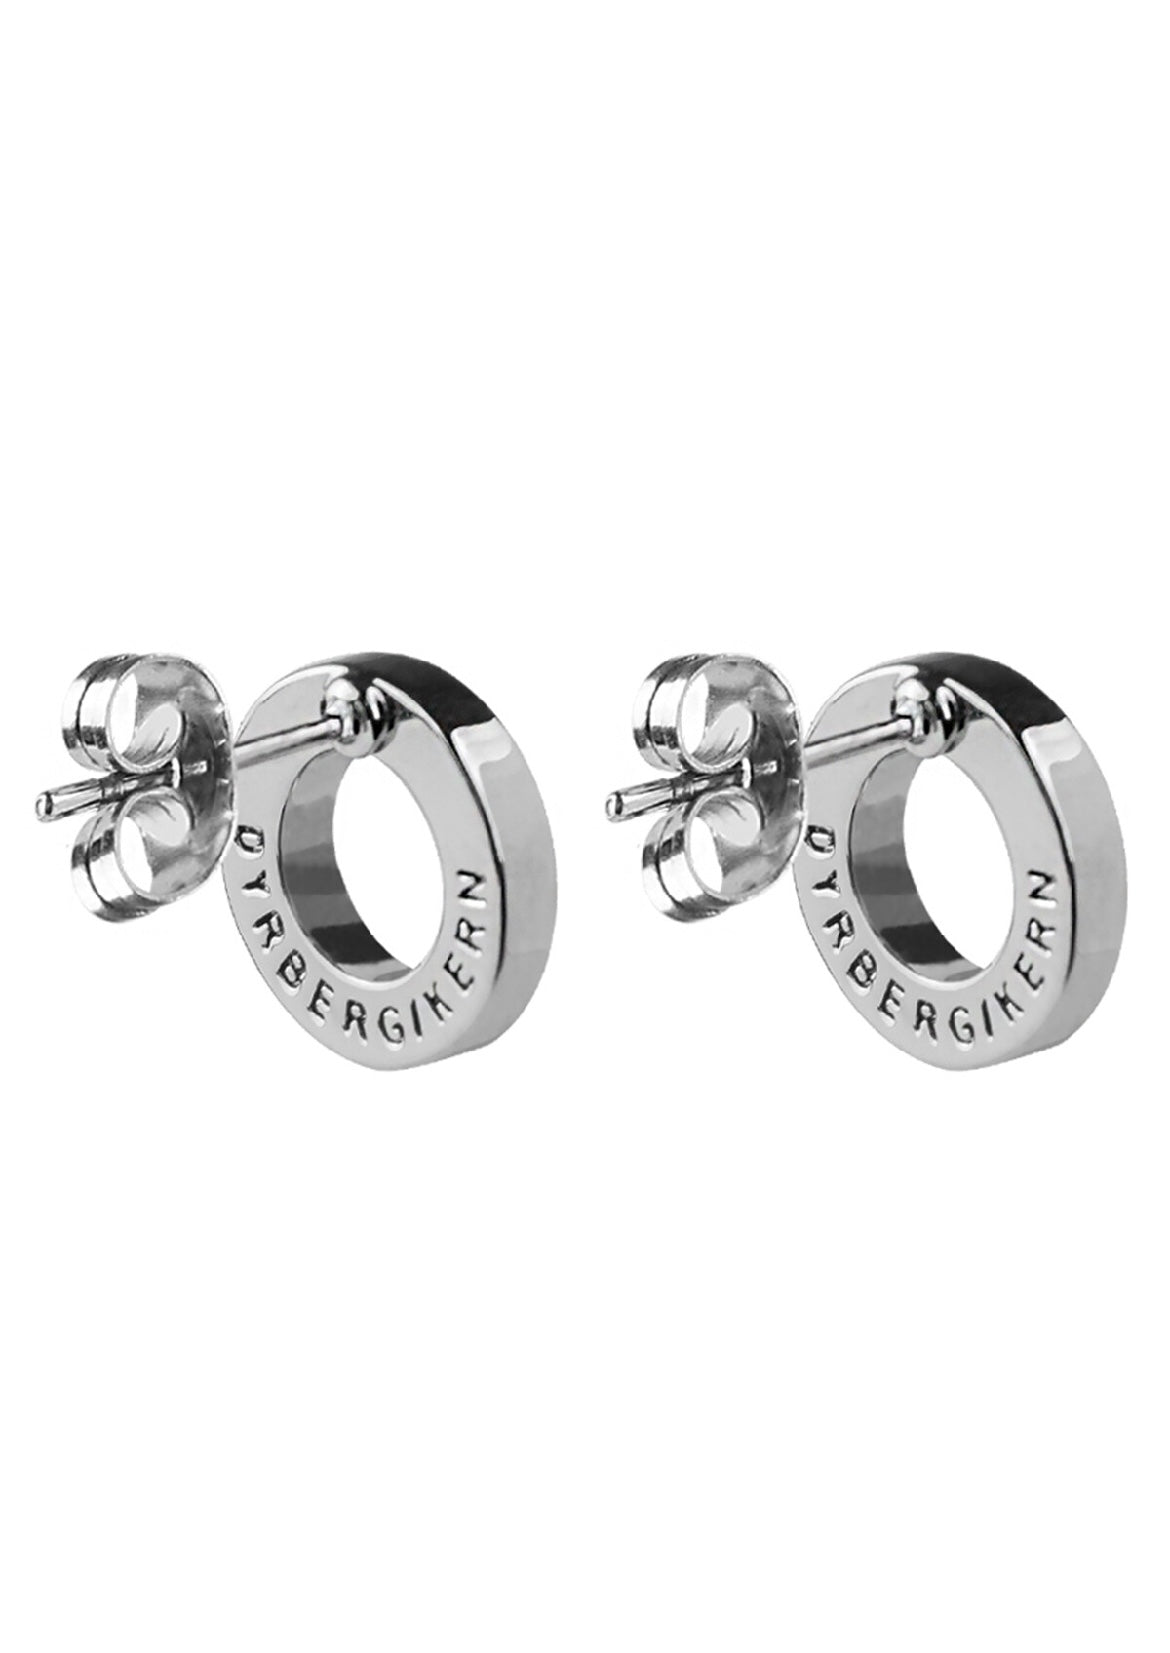 Dyrberg Kern Earrings - Koro Silver Stud with Crystals